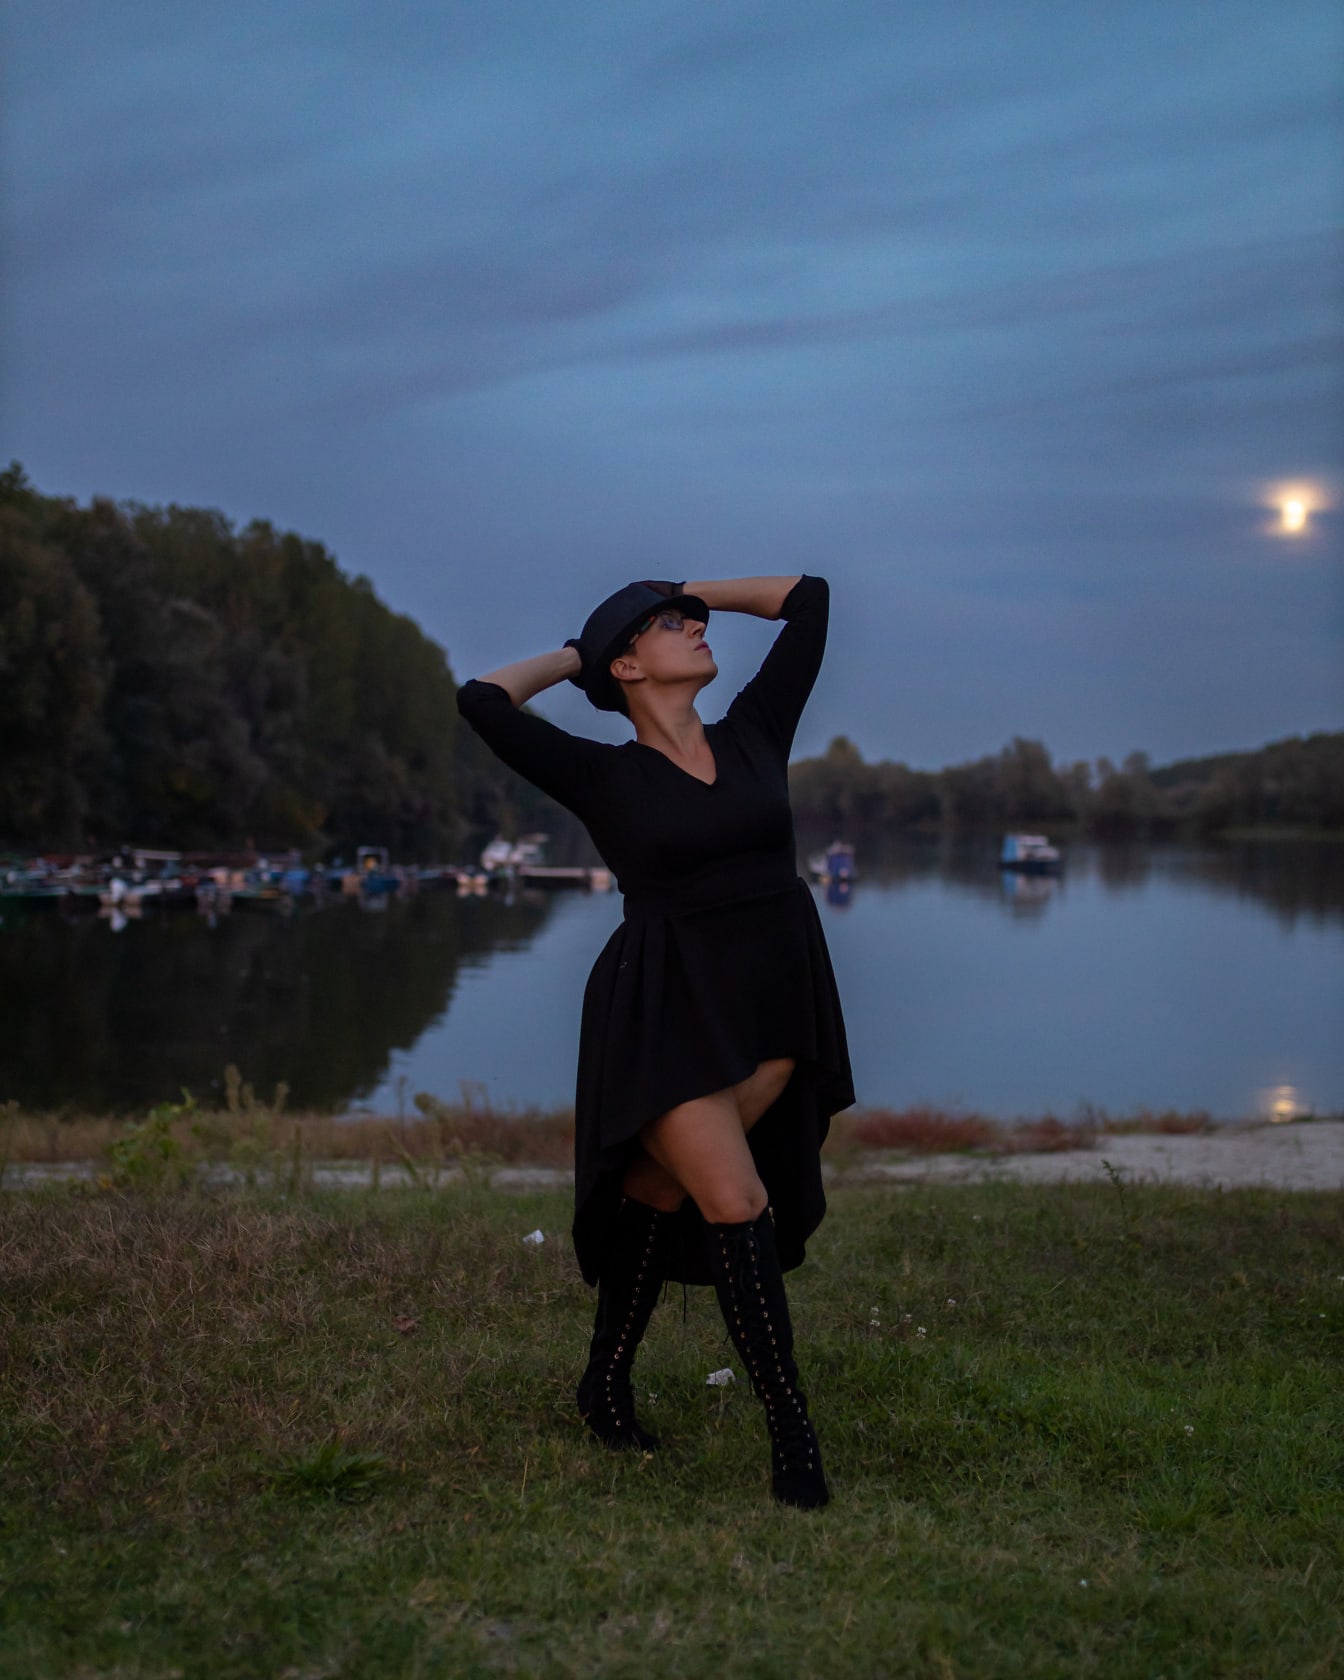 Photo model posing in fancy black dress and boots